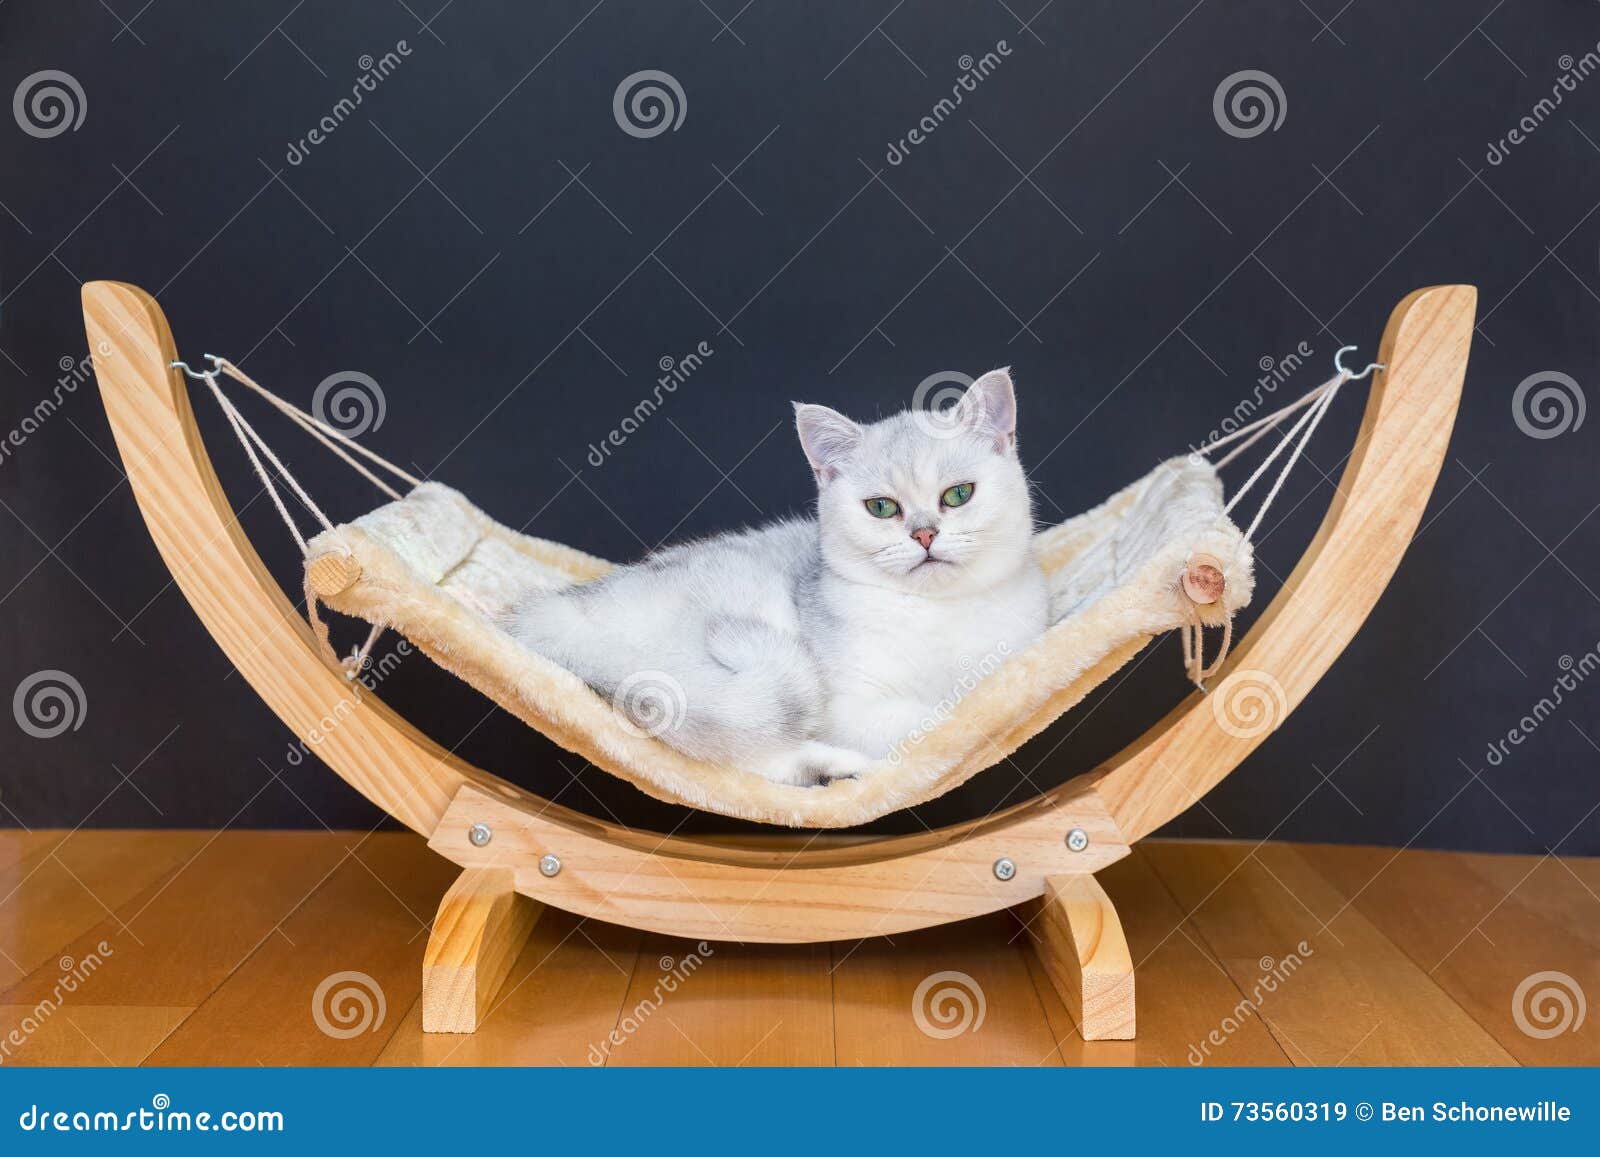 White Cat Lying Lazy In Hammock Stock Image - Image of hair ...